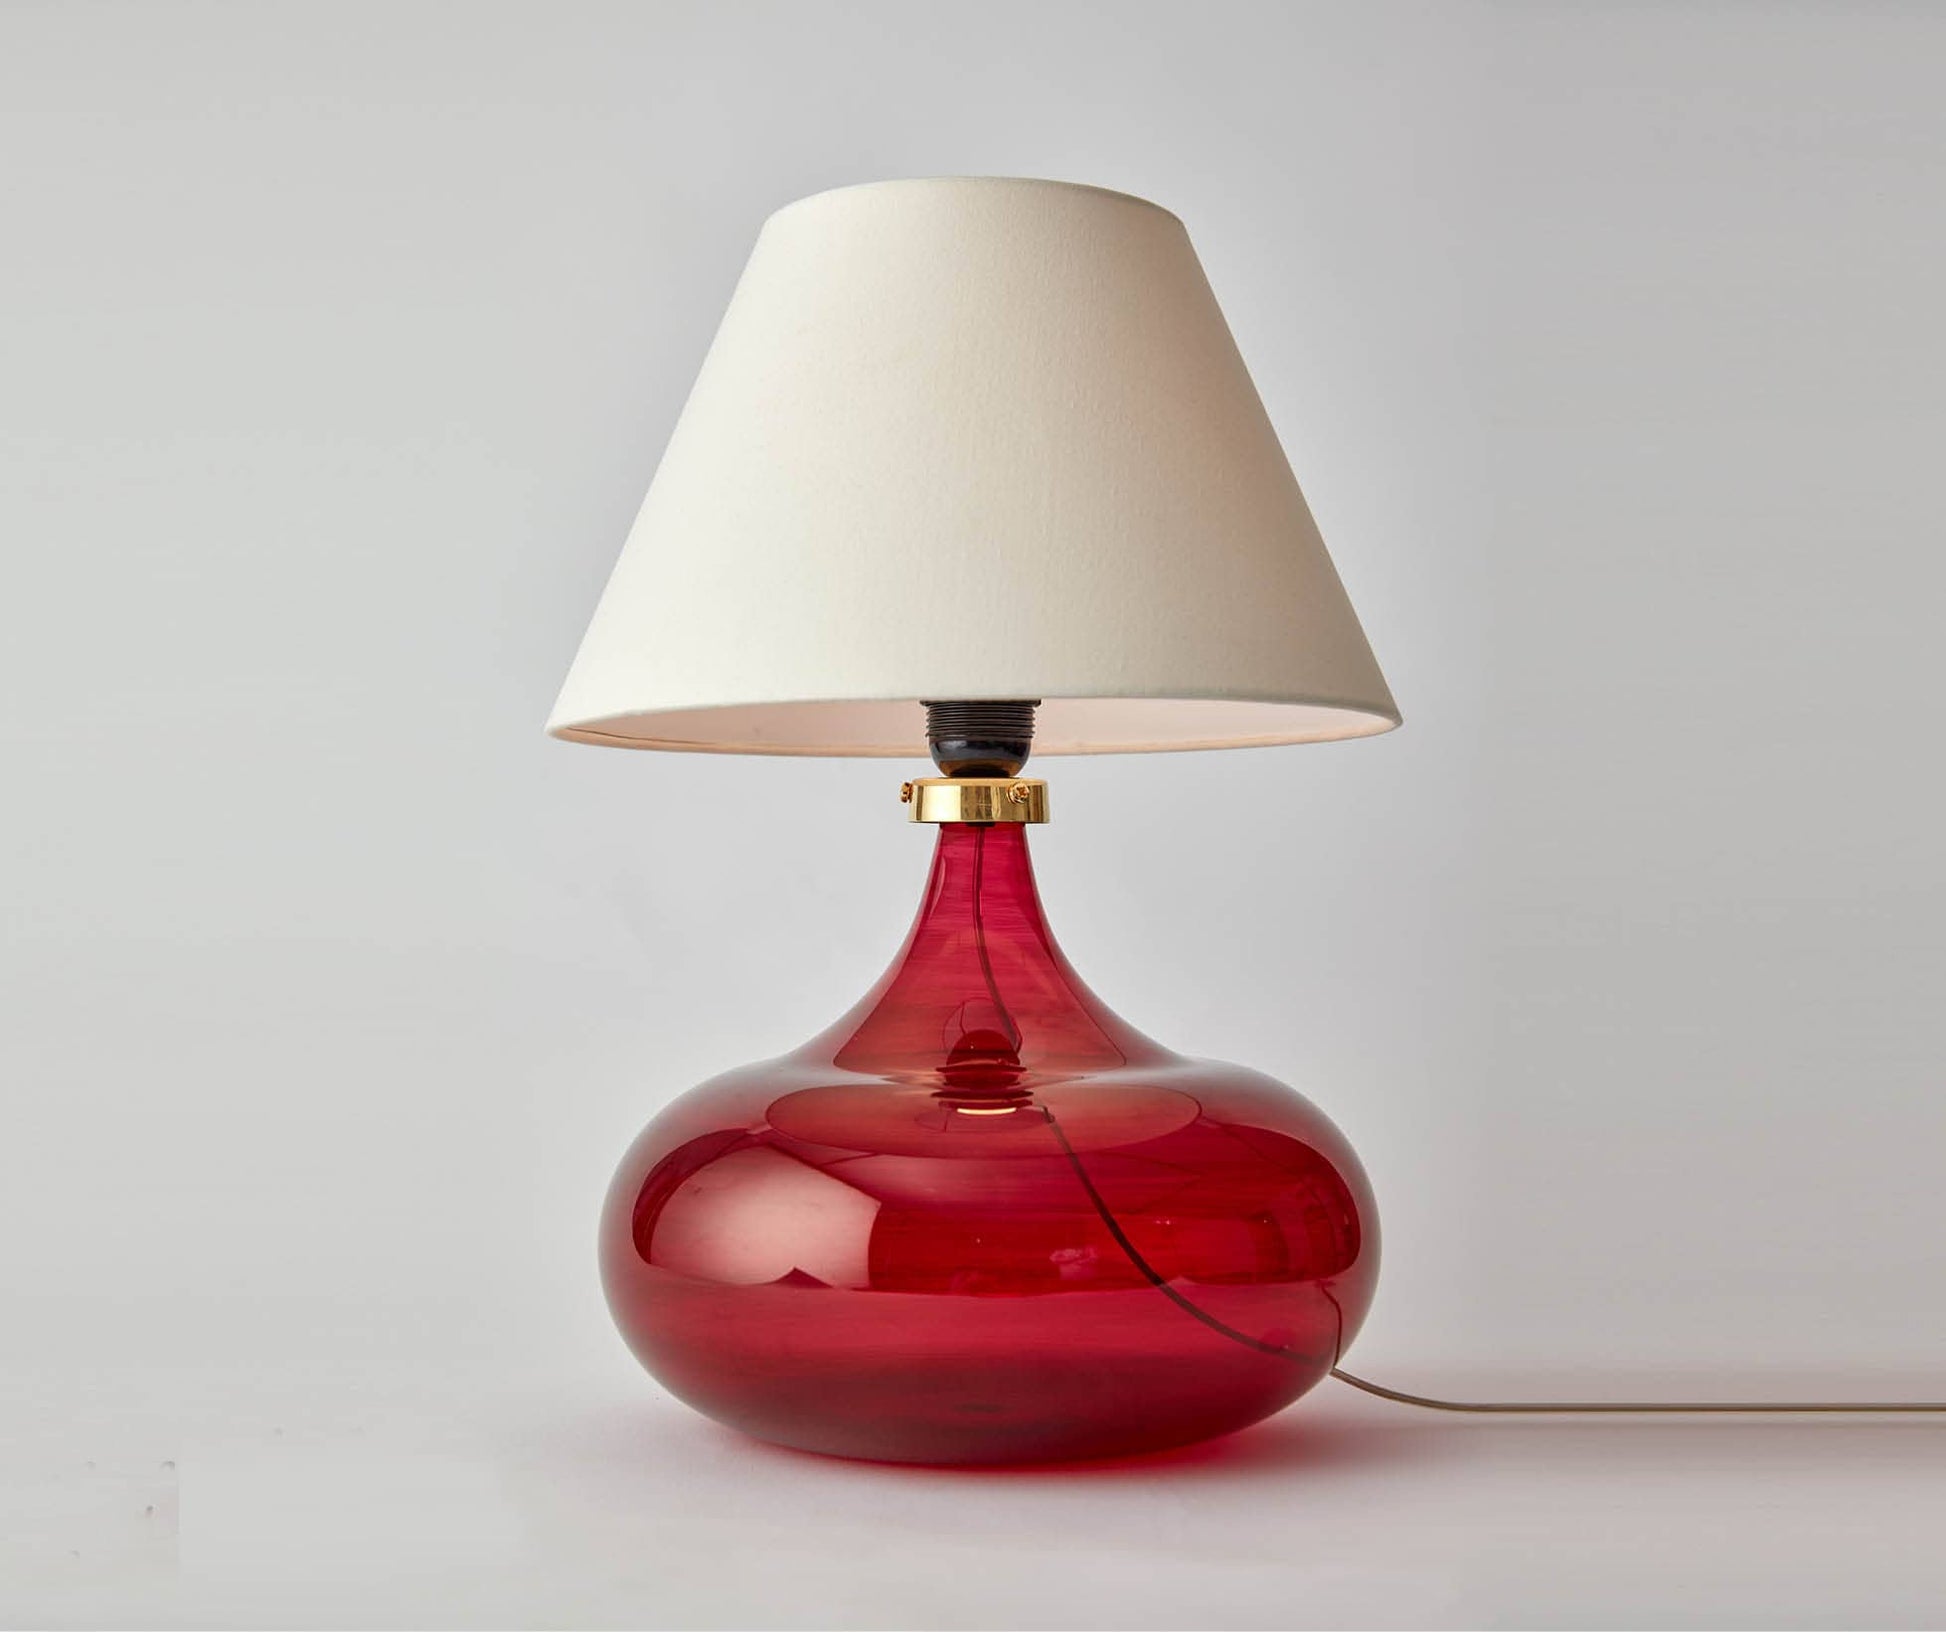 Handmade Concave Circle Red Hued Table Lamp - Les Trois Pyramides